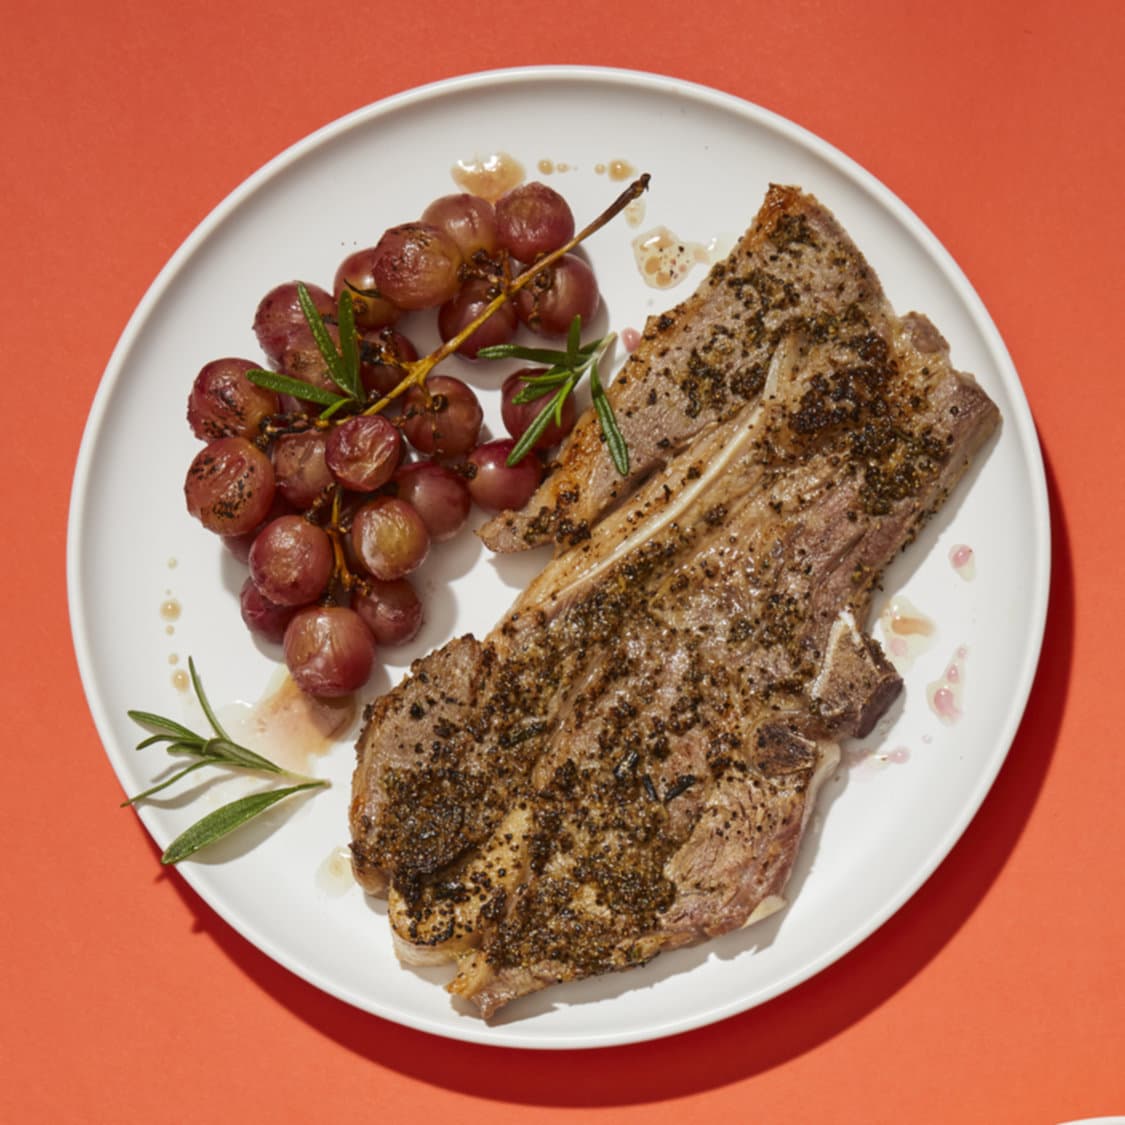 https://fleishigs.com/images/mobile-app/recipes/1644-list-broiled-veal-chops-with-grapes.jpg